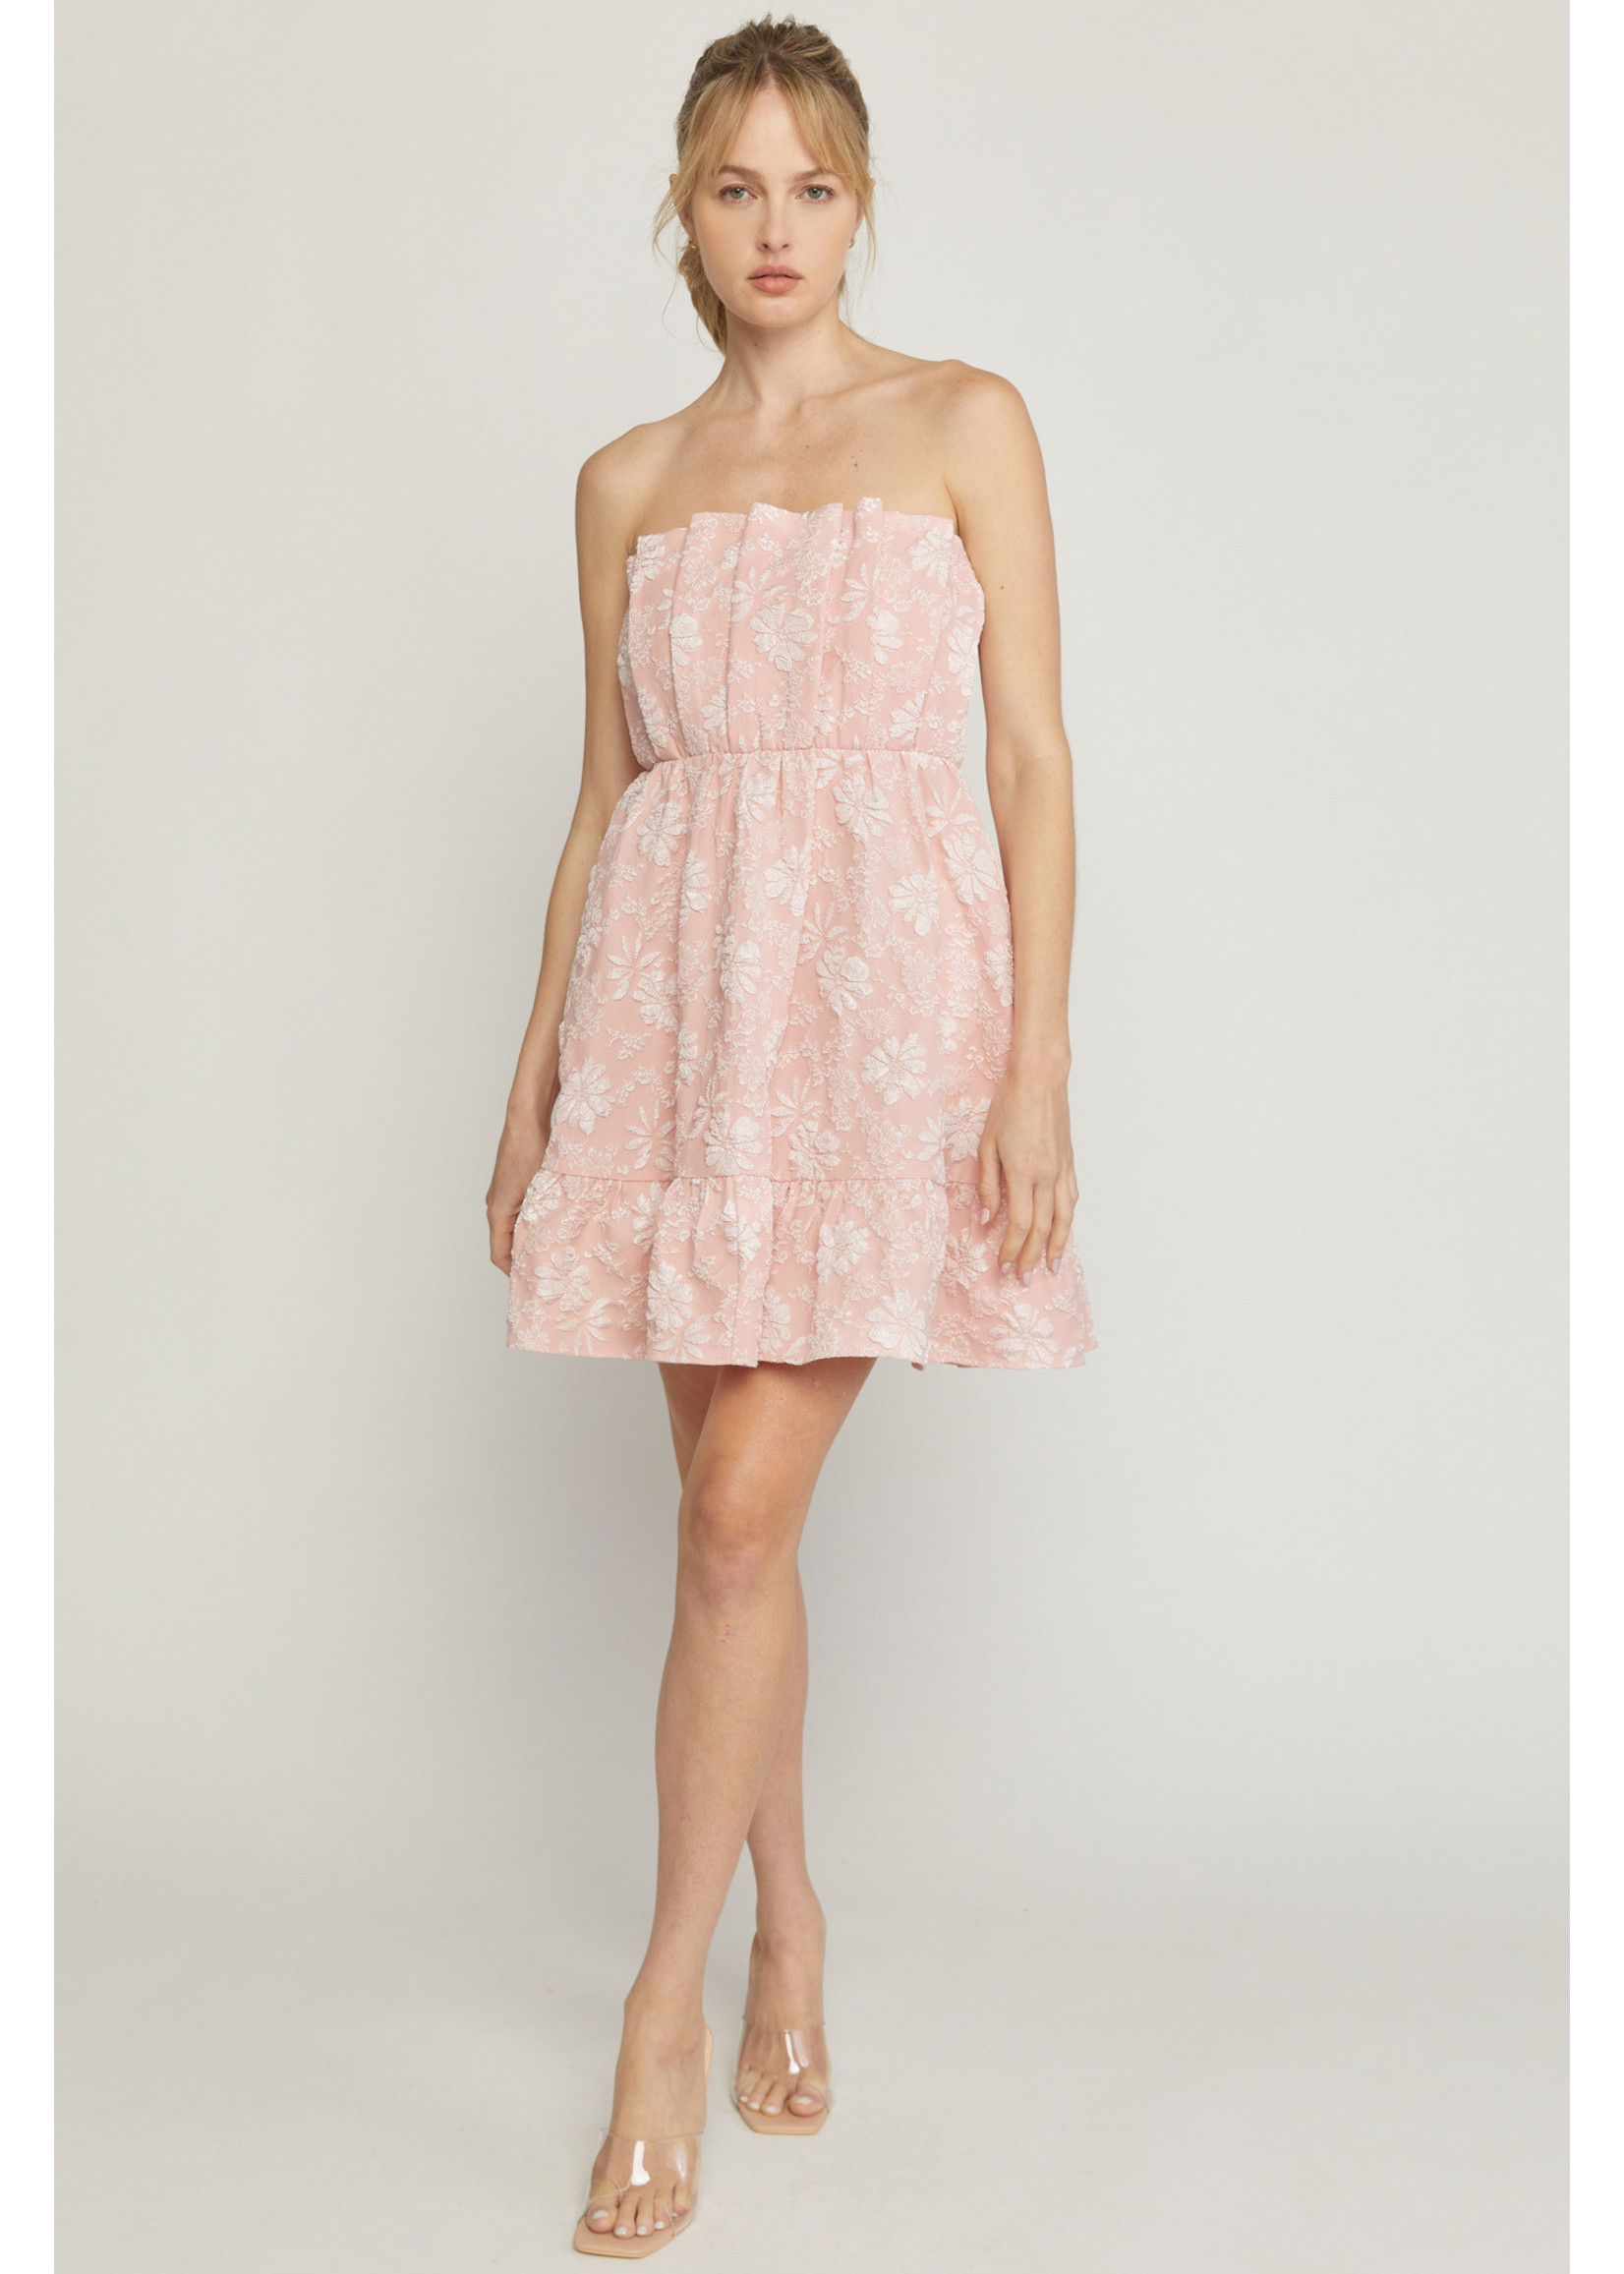 The Waldorf Pleated Floral Dress